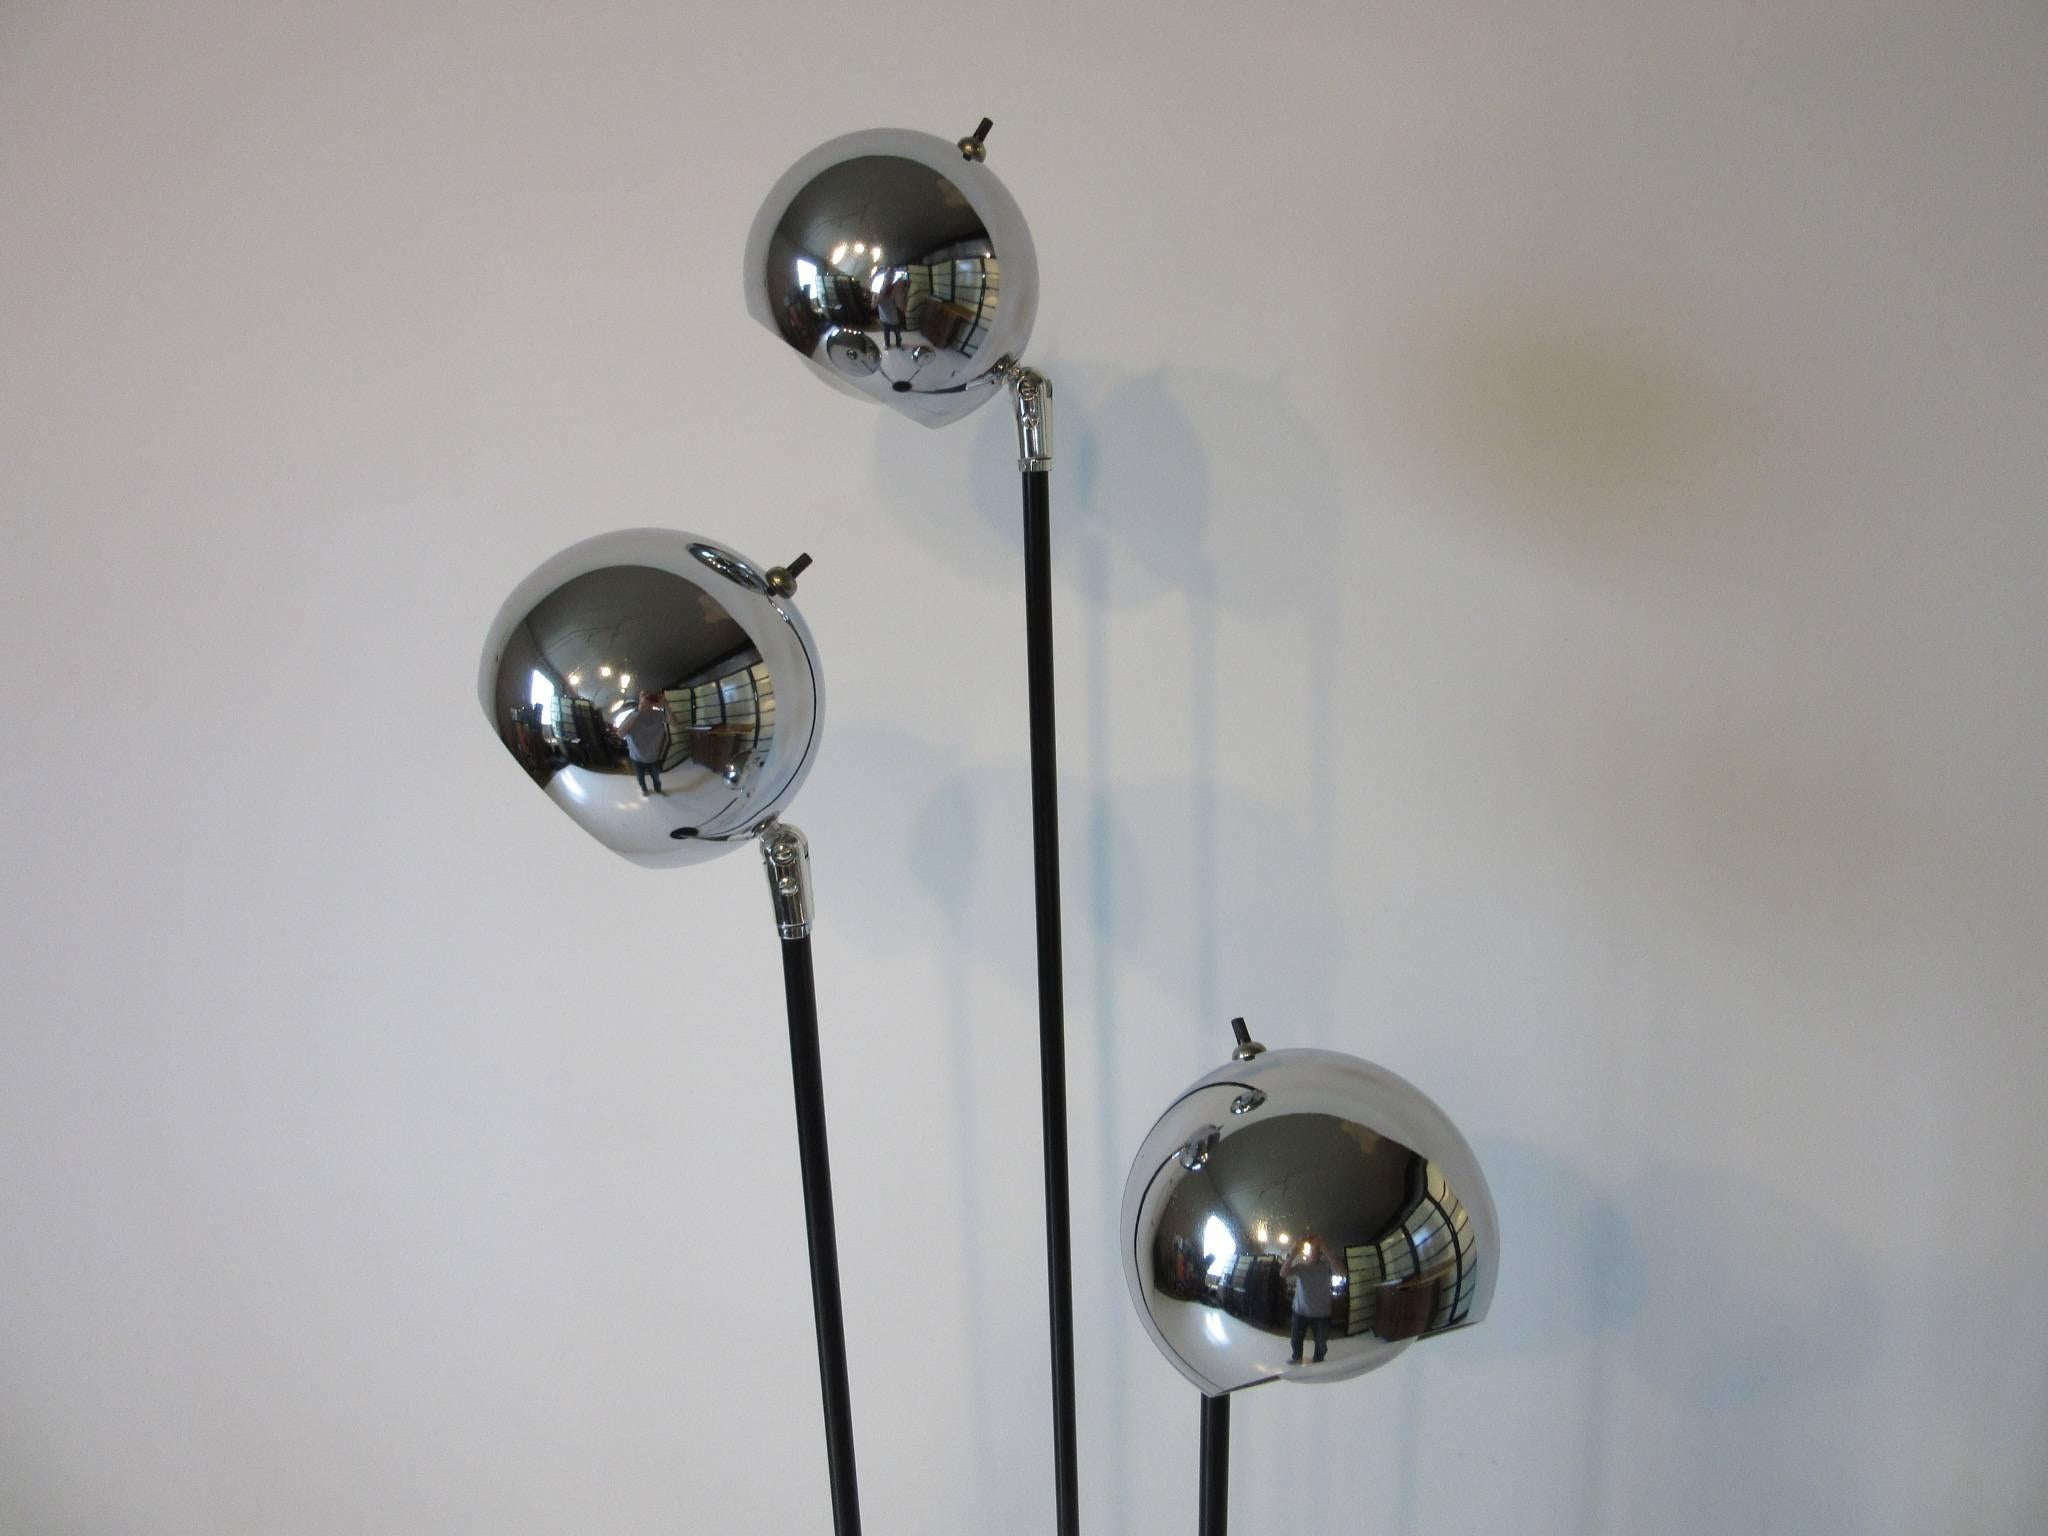 A three staff chromed ball floor lamp with satin black round metal base with chrome details, the balls are adjustable, manufactured by the Robert Sonneman Lamp company.